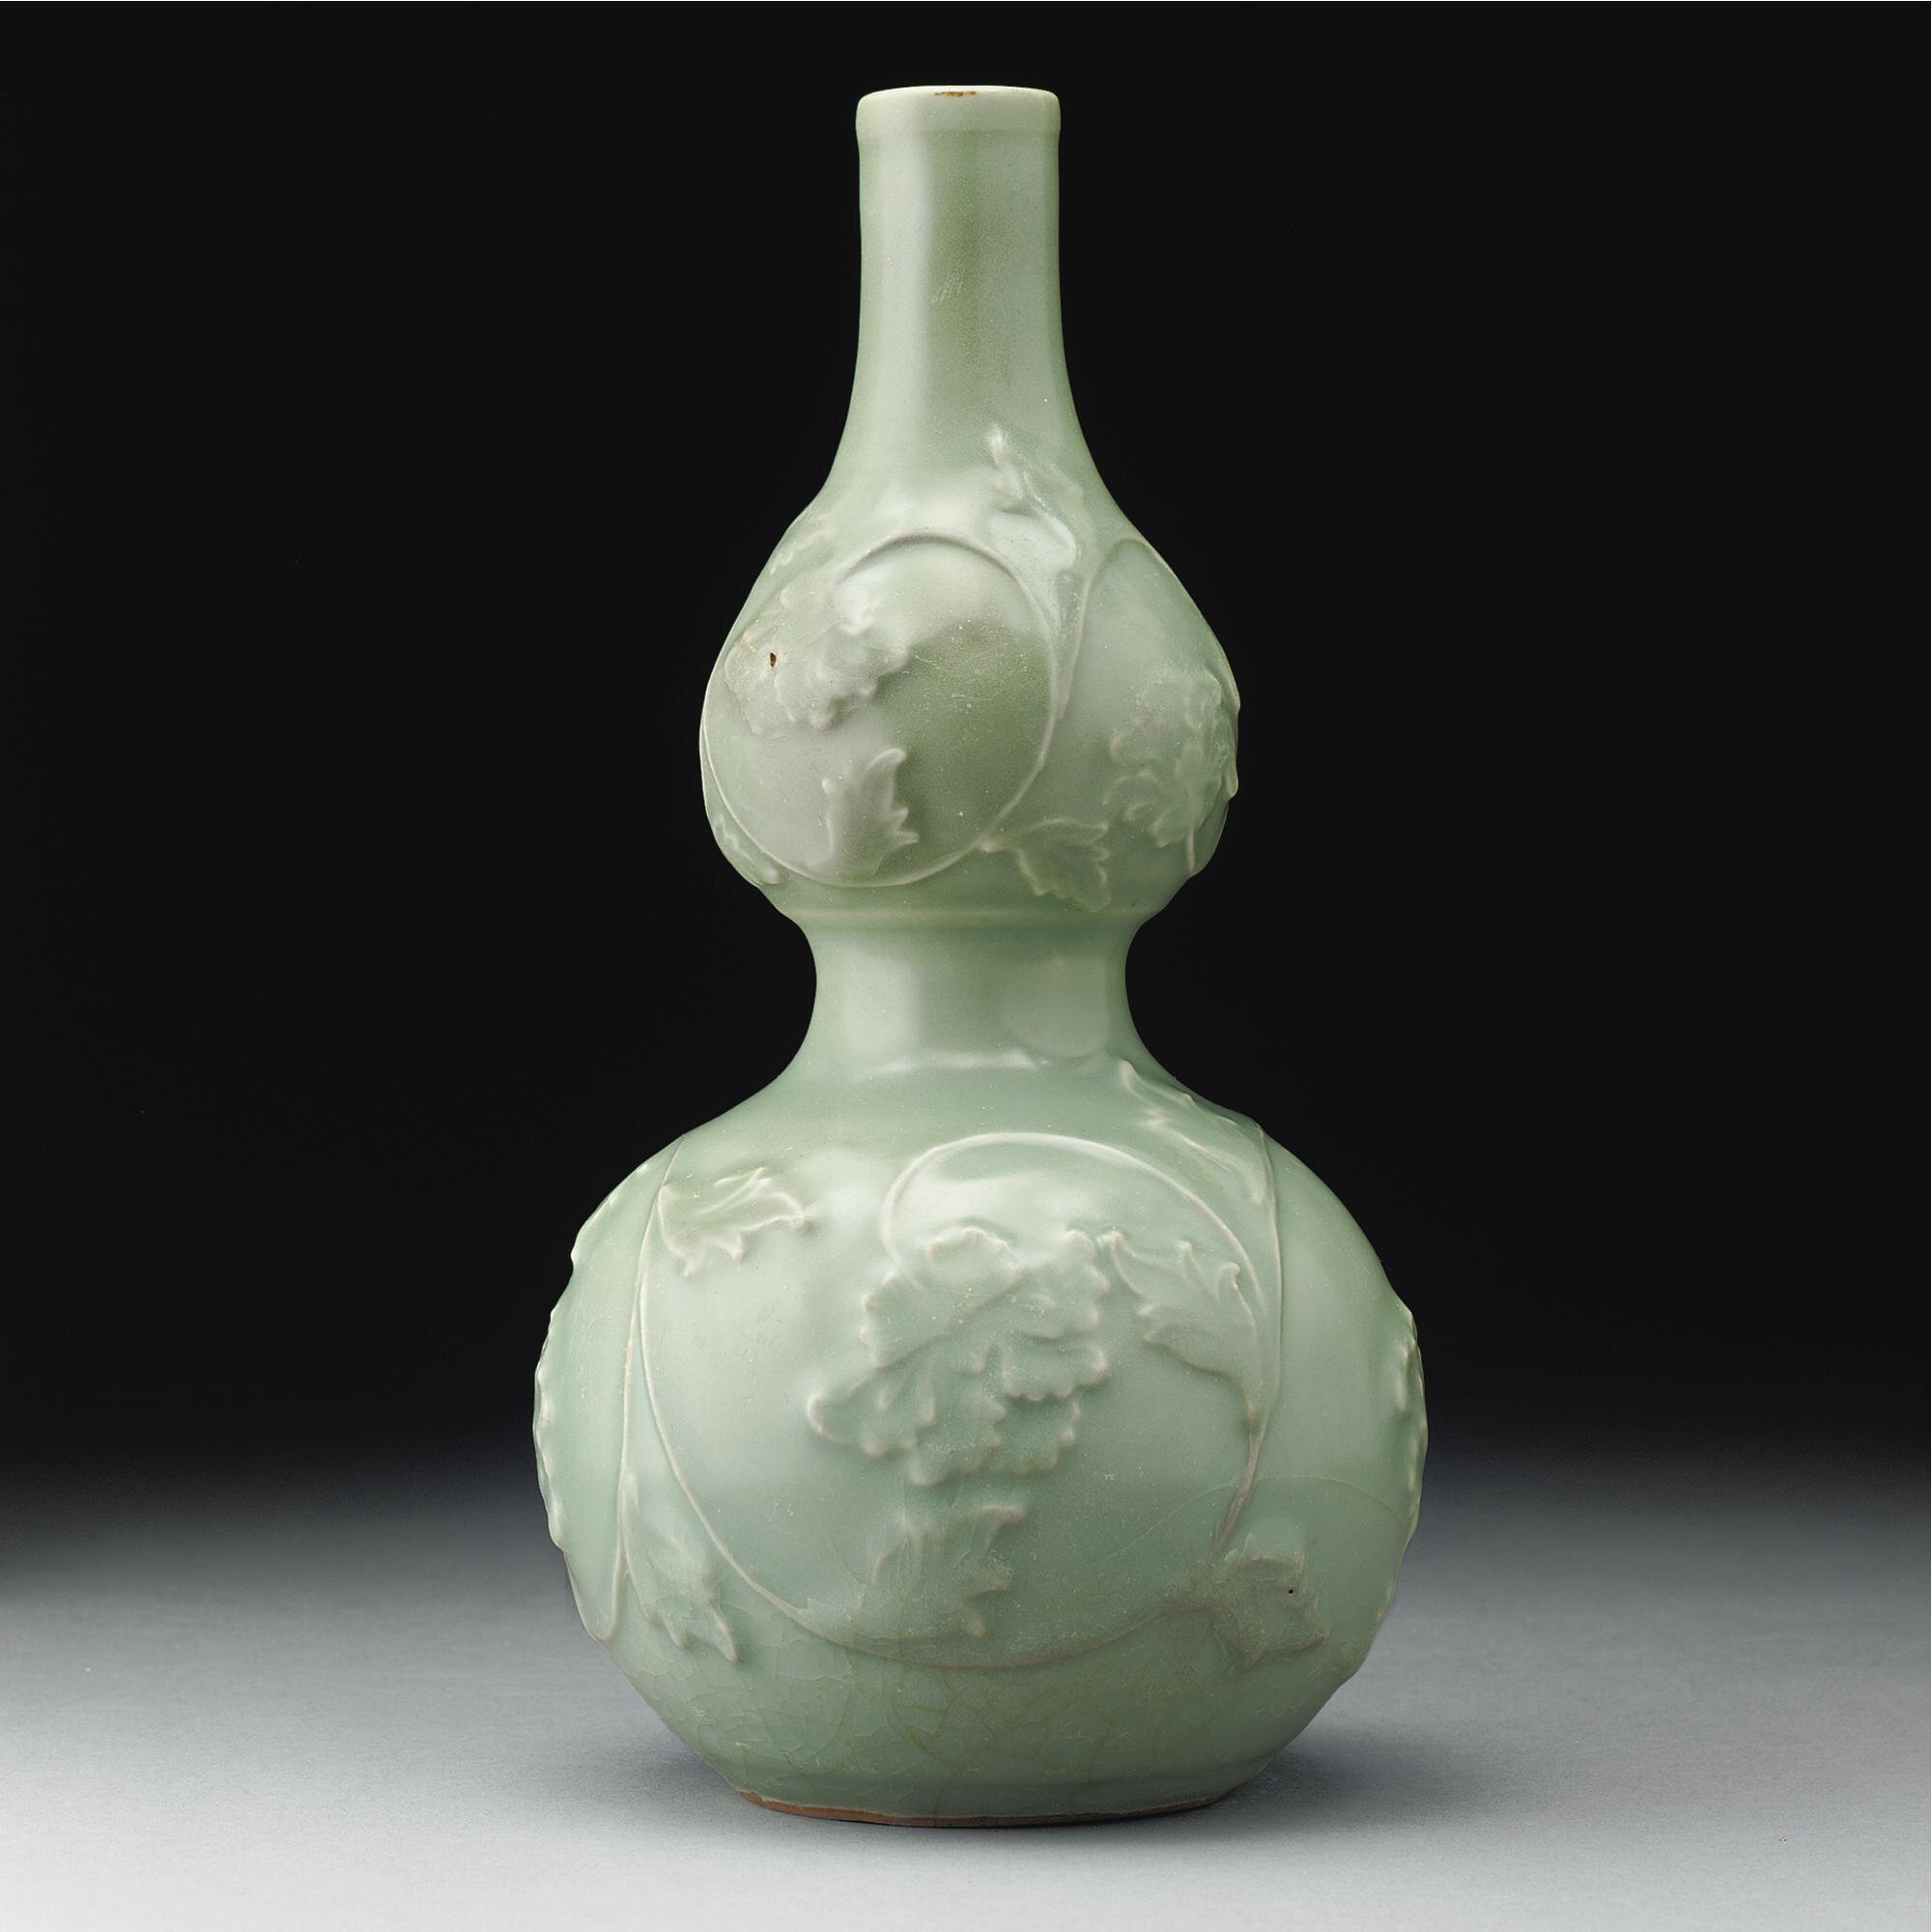 A rare 'longquan' celadon double-gourd vase with applied decoration, Yuan dynasty